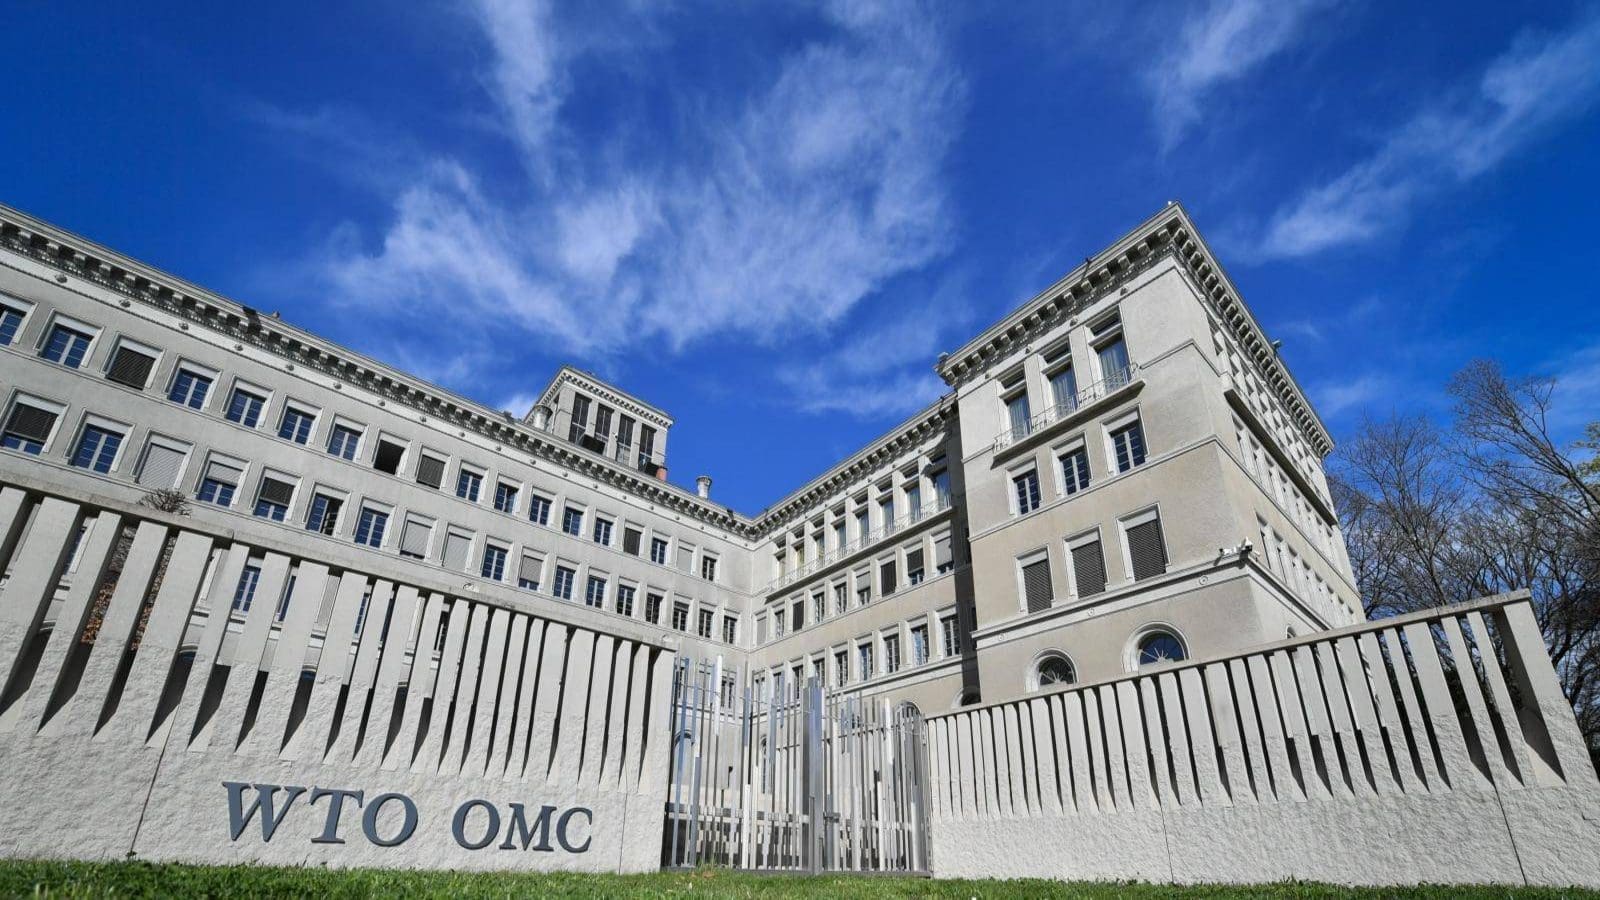 WTO says export restrictions can further contribute to worsened global economic outlook